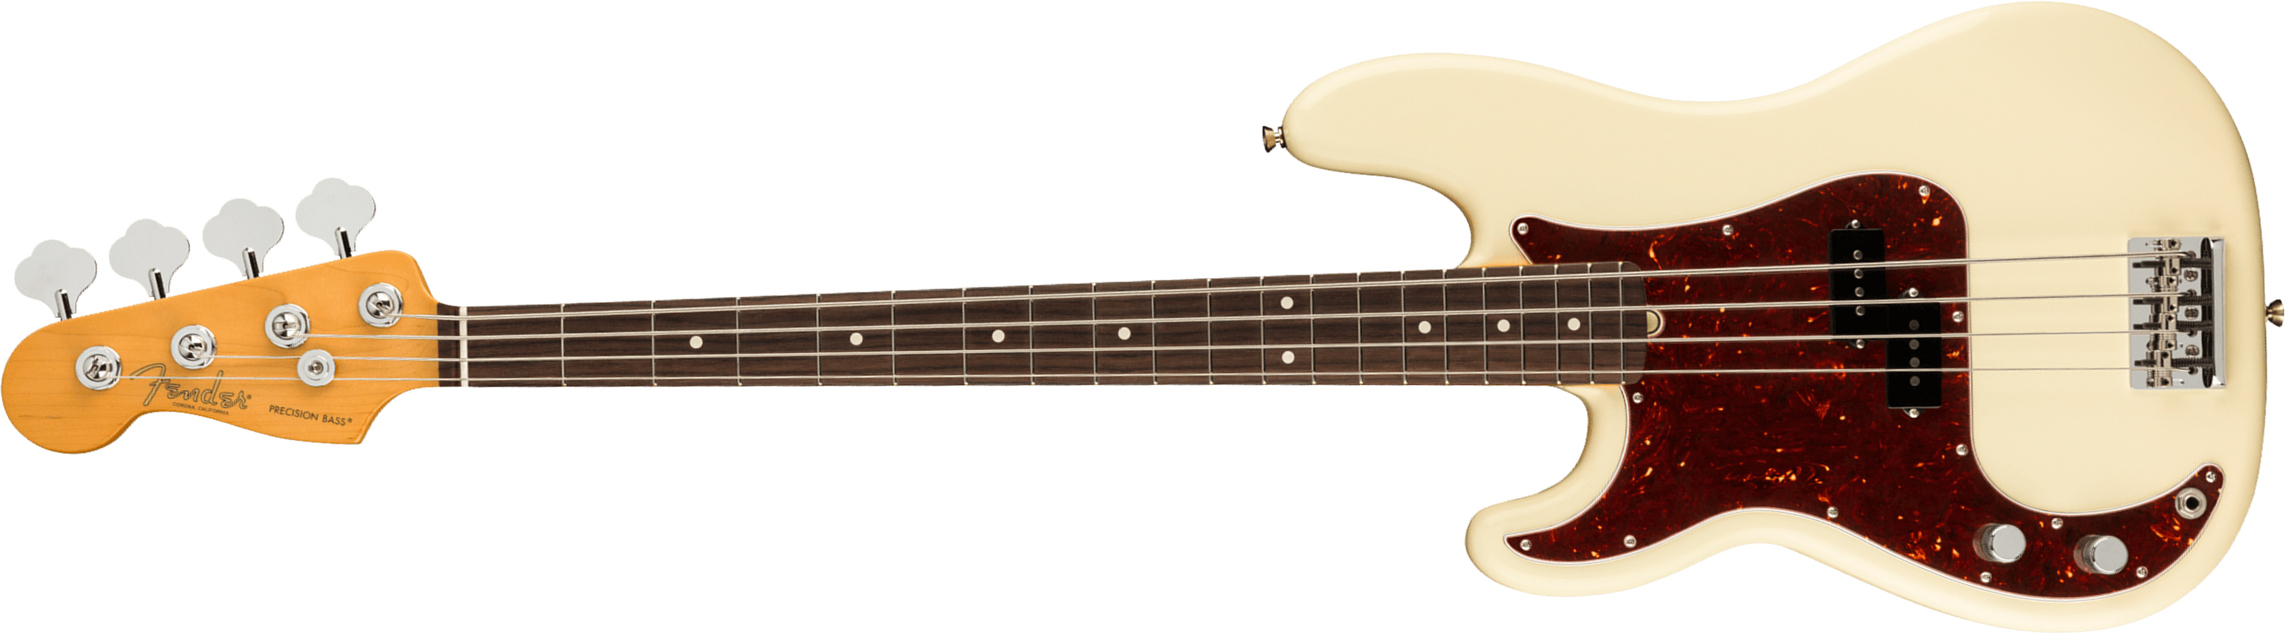 Fender Precision Bass American Professional Ii Lh Gaucher Usa Rw - Olympic White - Solidbody E-bass - Main picture